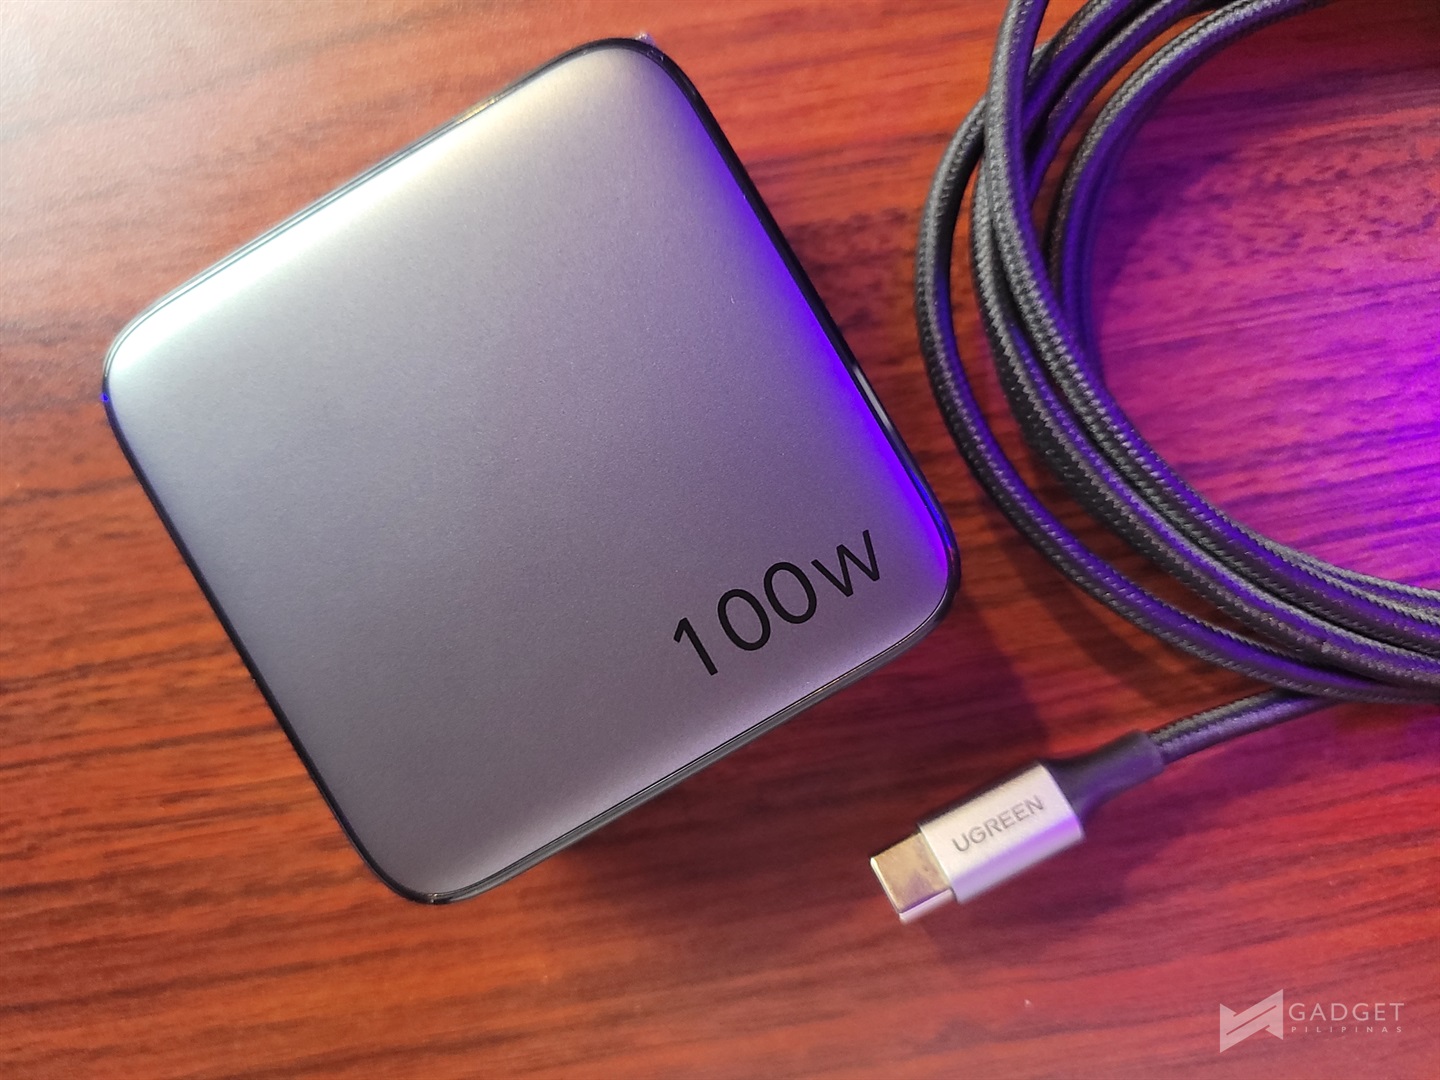 Quick Bytes: UGREEN 100W may just be your best charger “budol” this 11.11